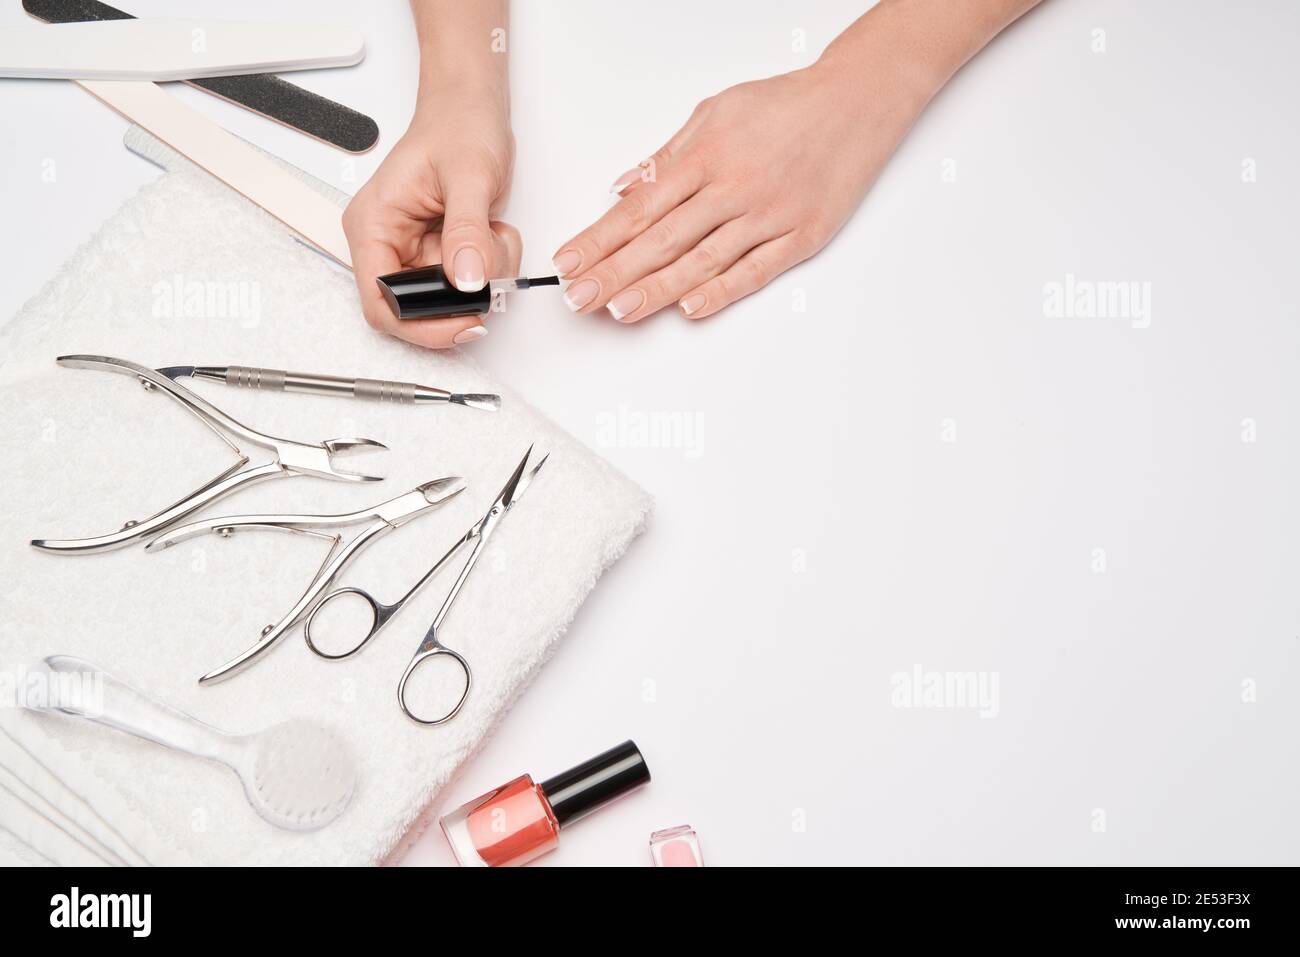 top view of manicure tools set for nail care over light background - brush, scissors, nail polish, file and tweezers Stock Photo